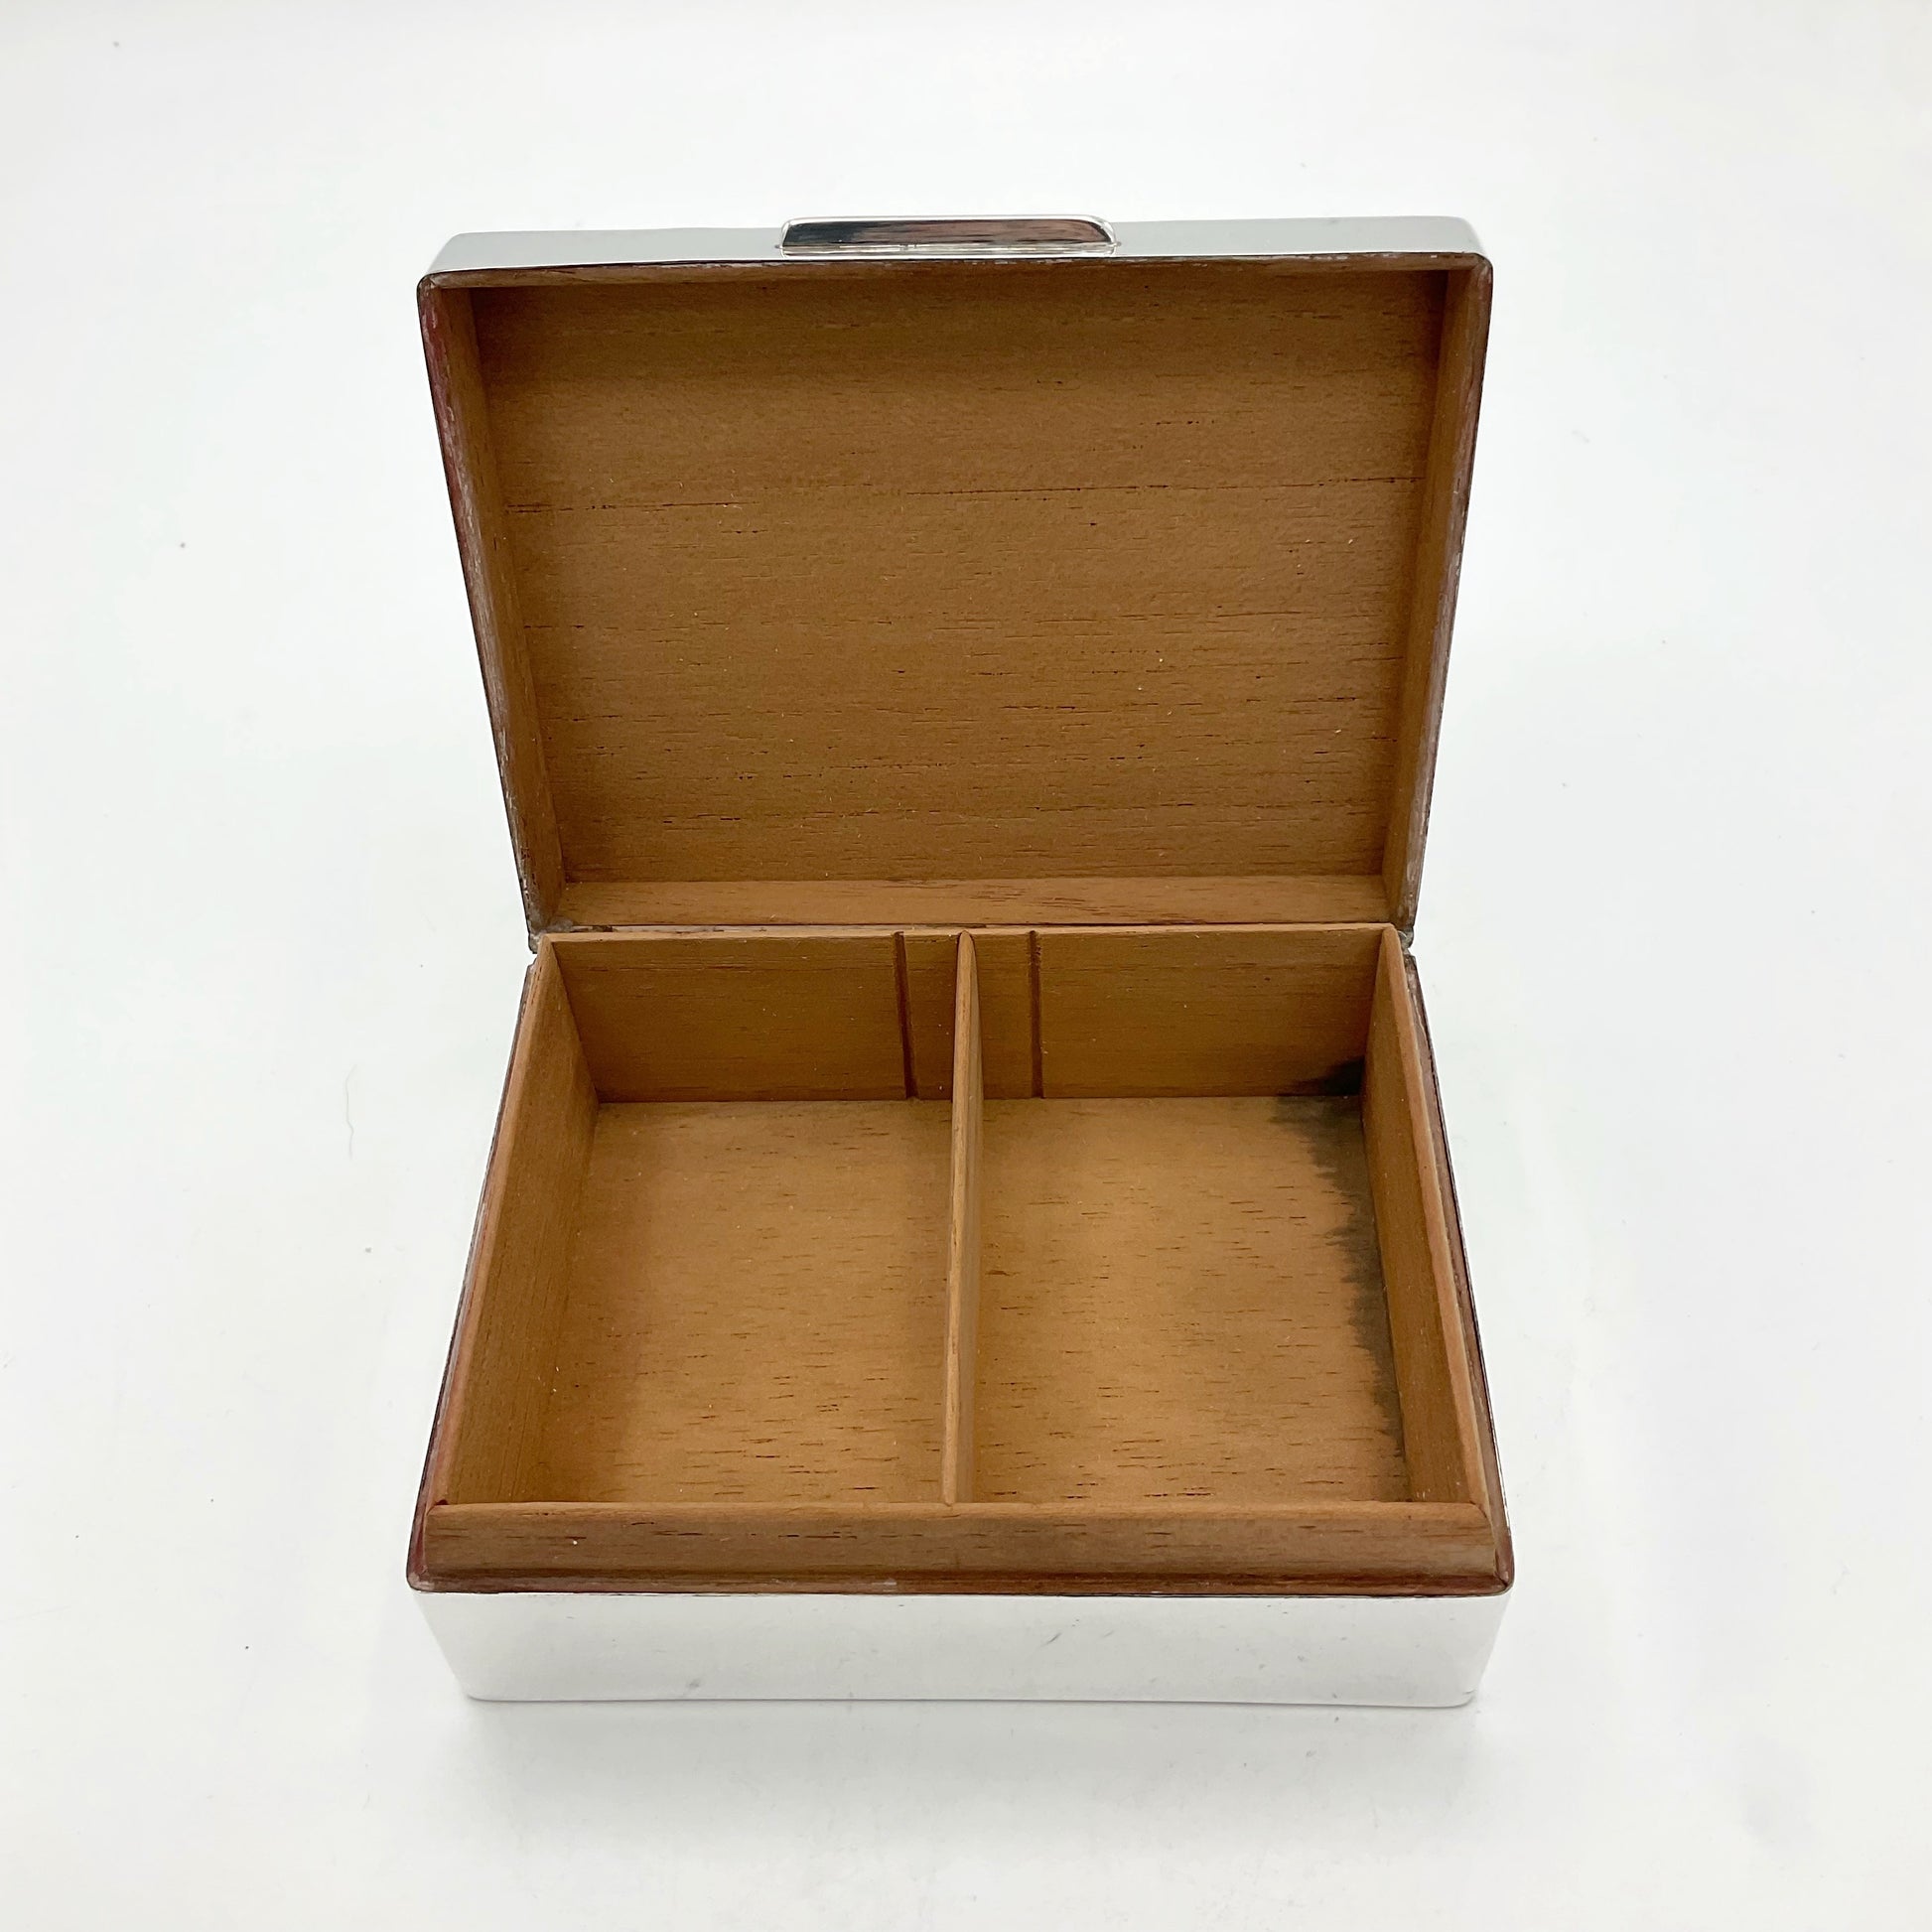 Vintage cigarette box lid open showing fully lined cedar wood interior and a divider in the middle